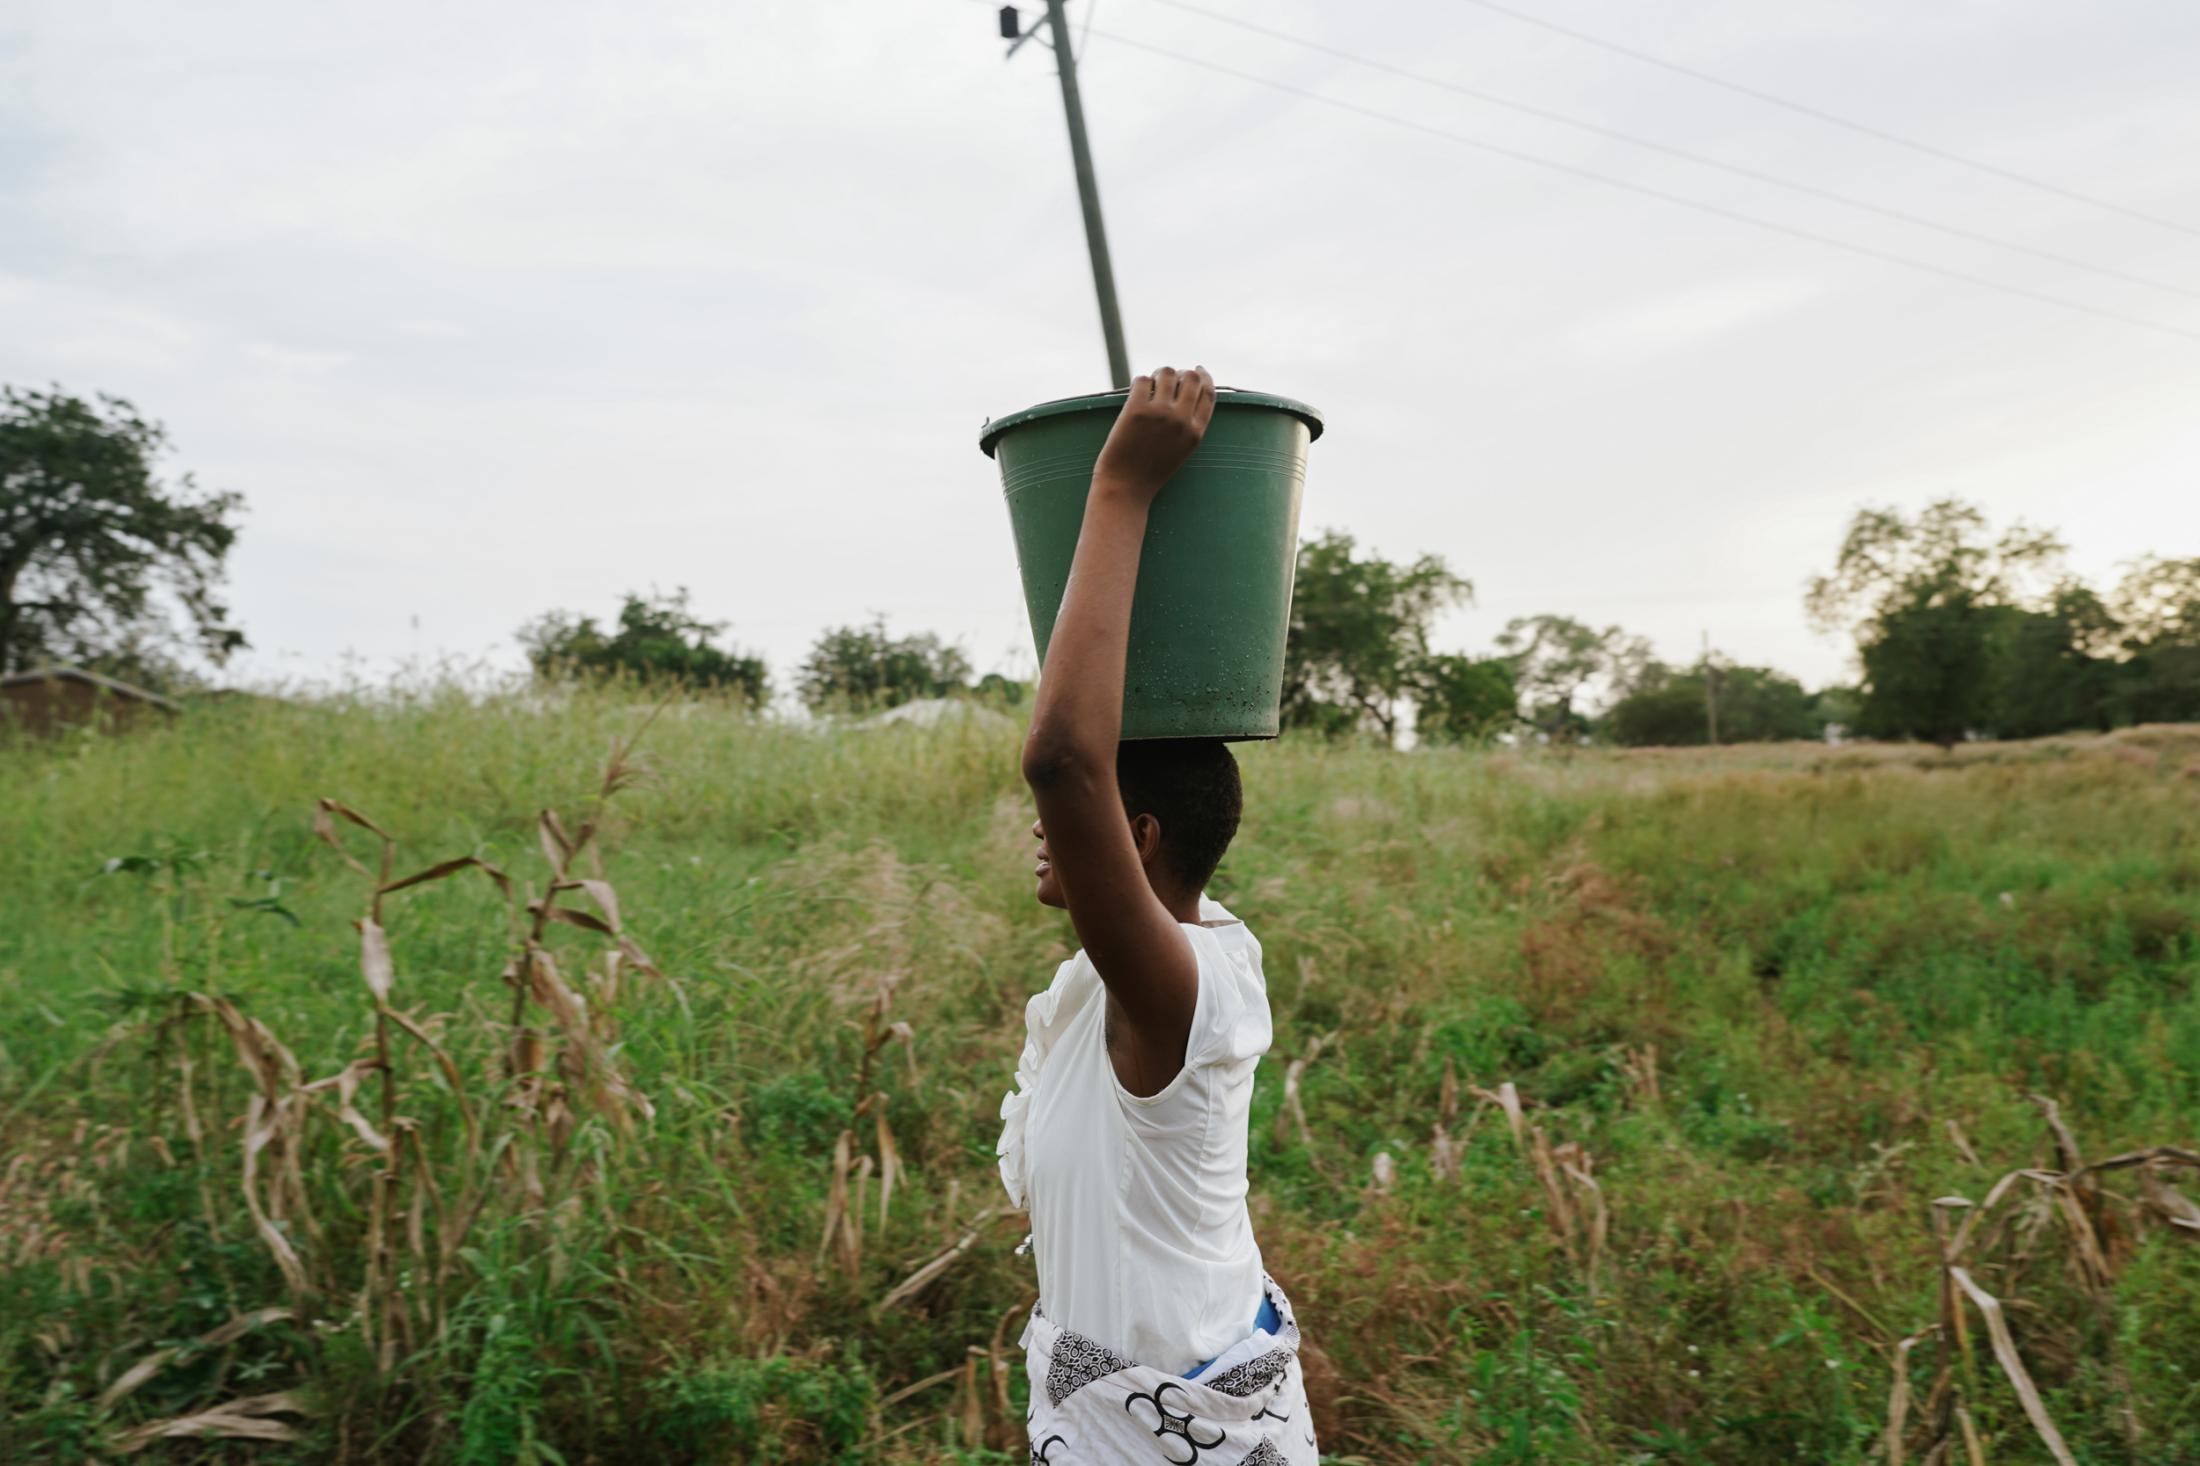 Francisca Akanko (14), student of Azenab Girls Primary School, fetches water as one of her after school chores. Wiaga, Upper East Region of Ghana,...